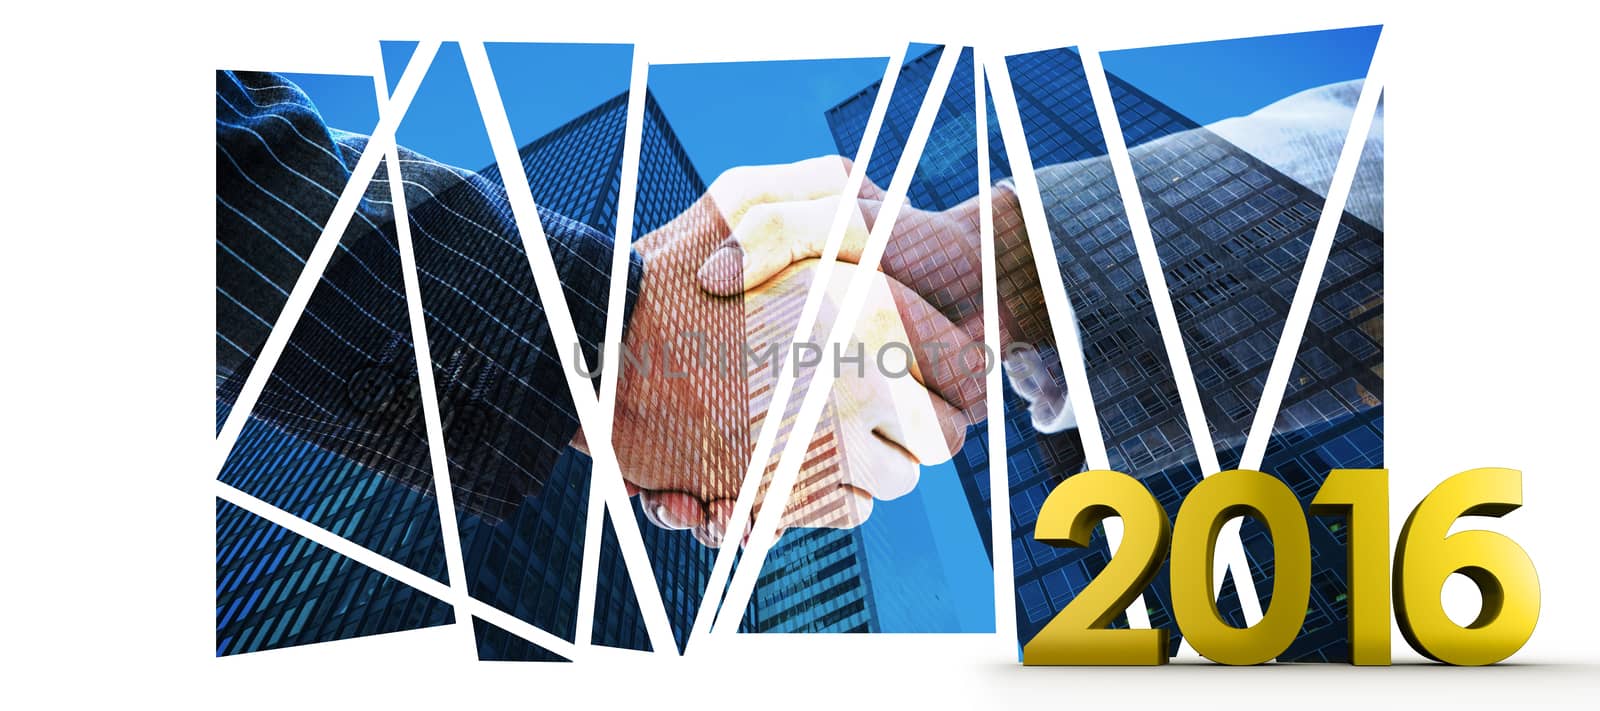 2016 graphic against composite image of business people shaking hands